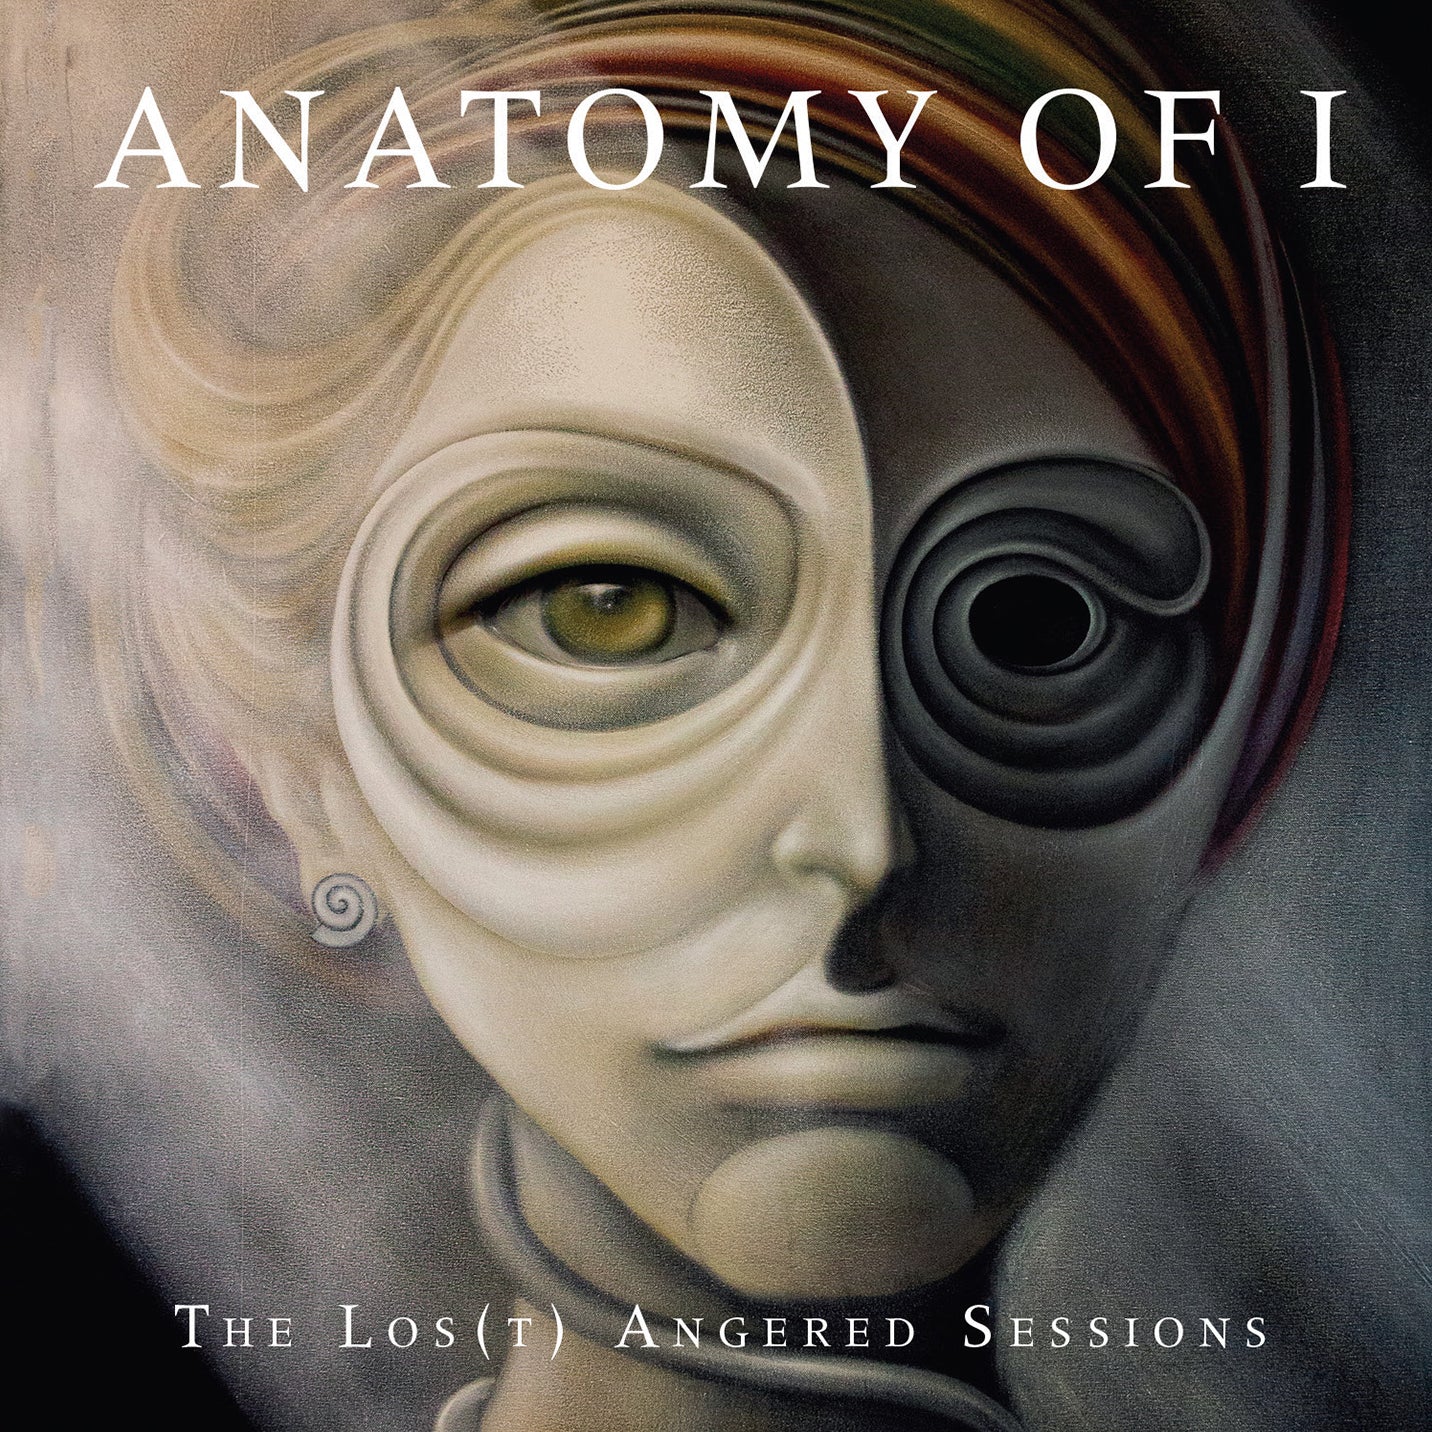 Anatomy Of I "The Los(t) Angered Sessions" CD